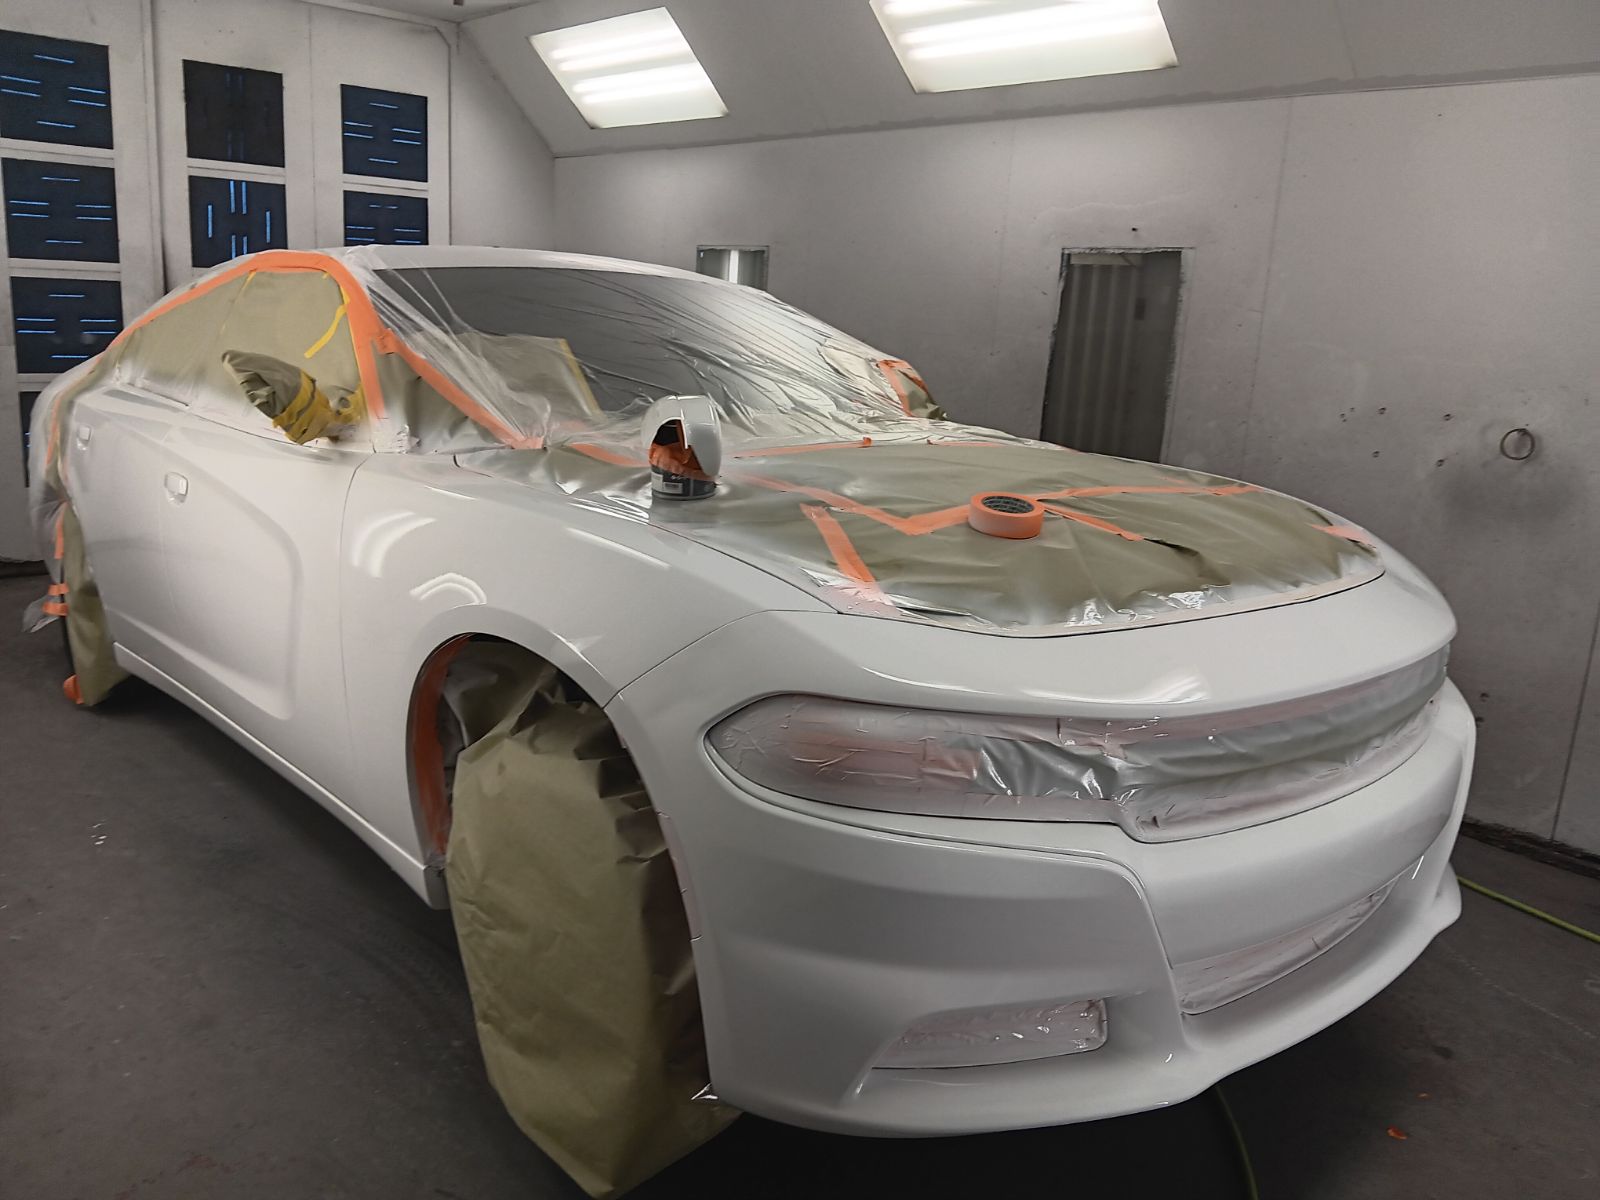 P & Y Auto Body and Painting